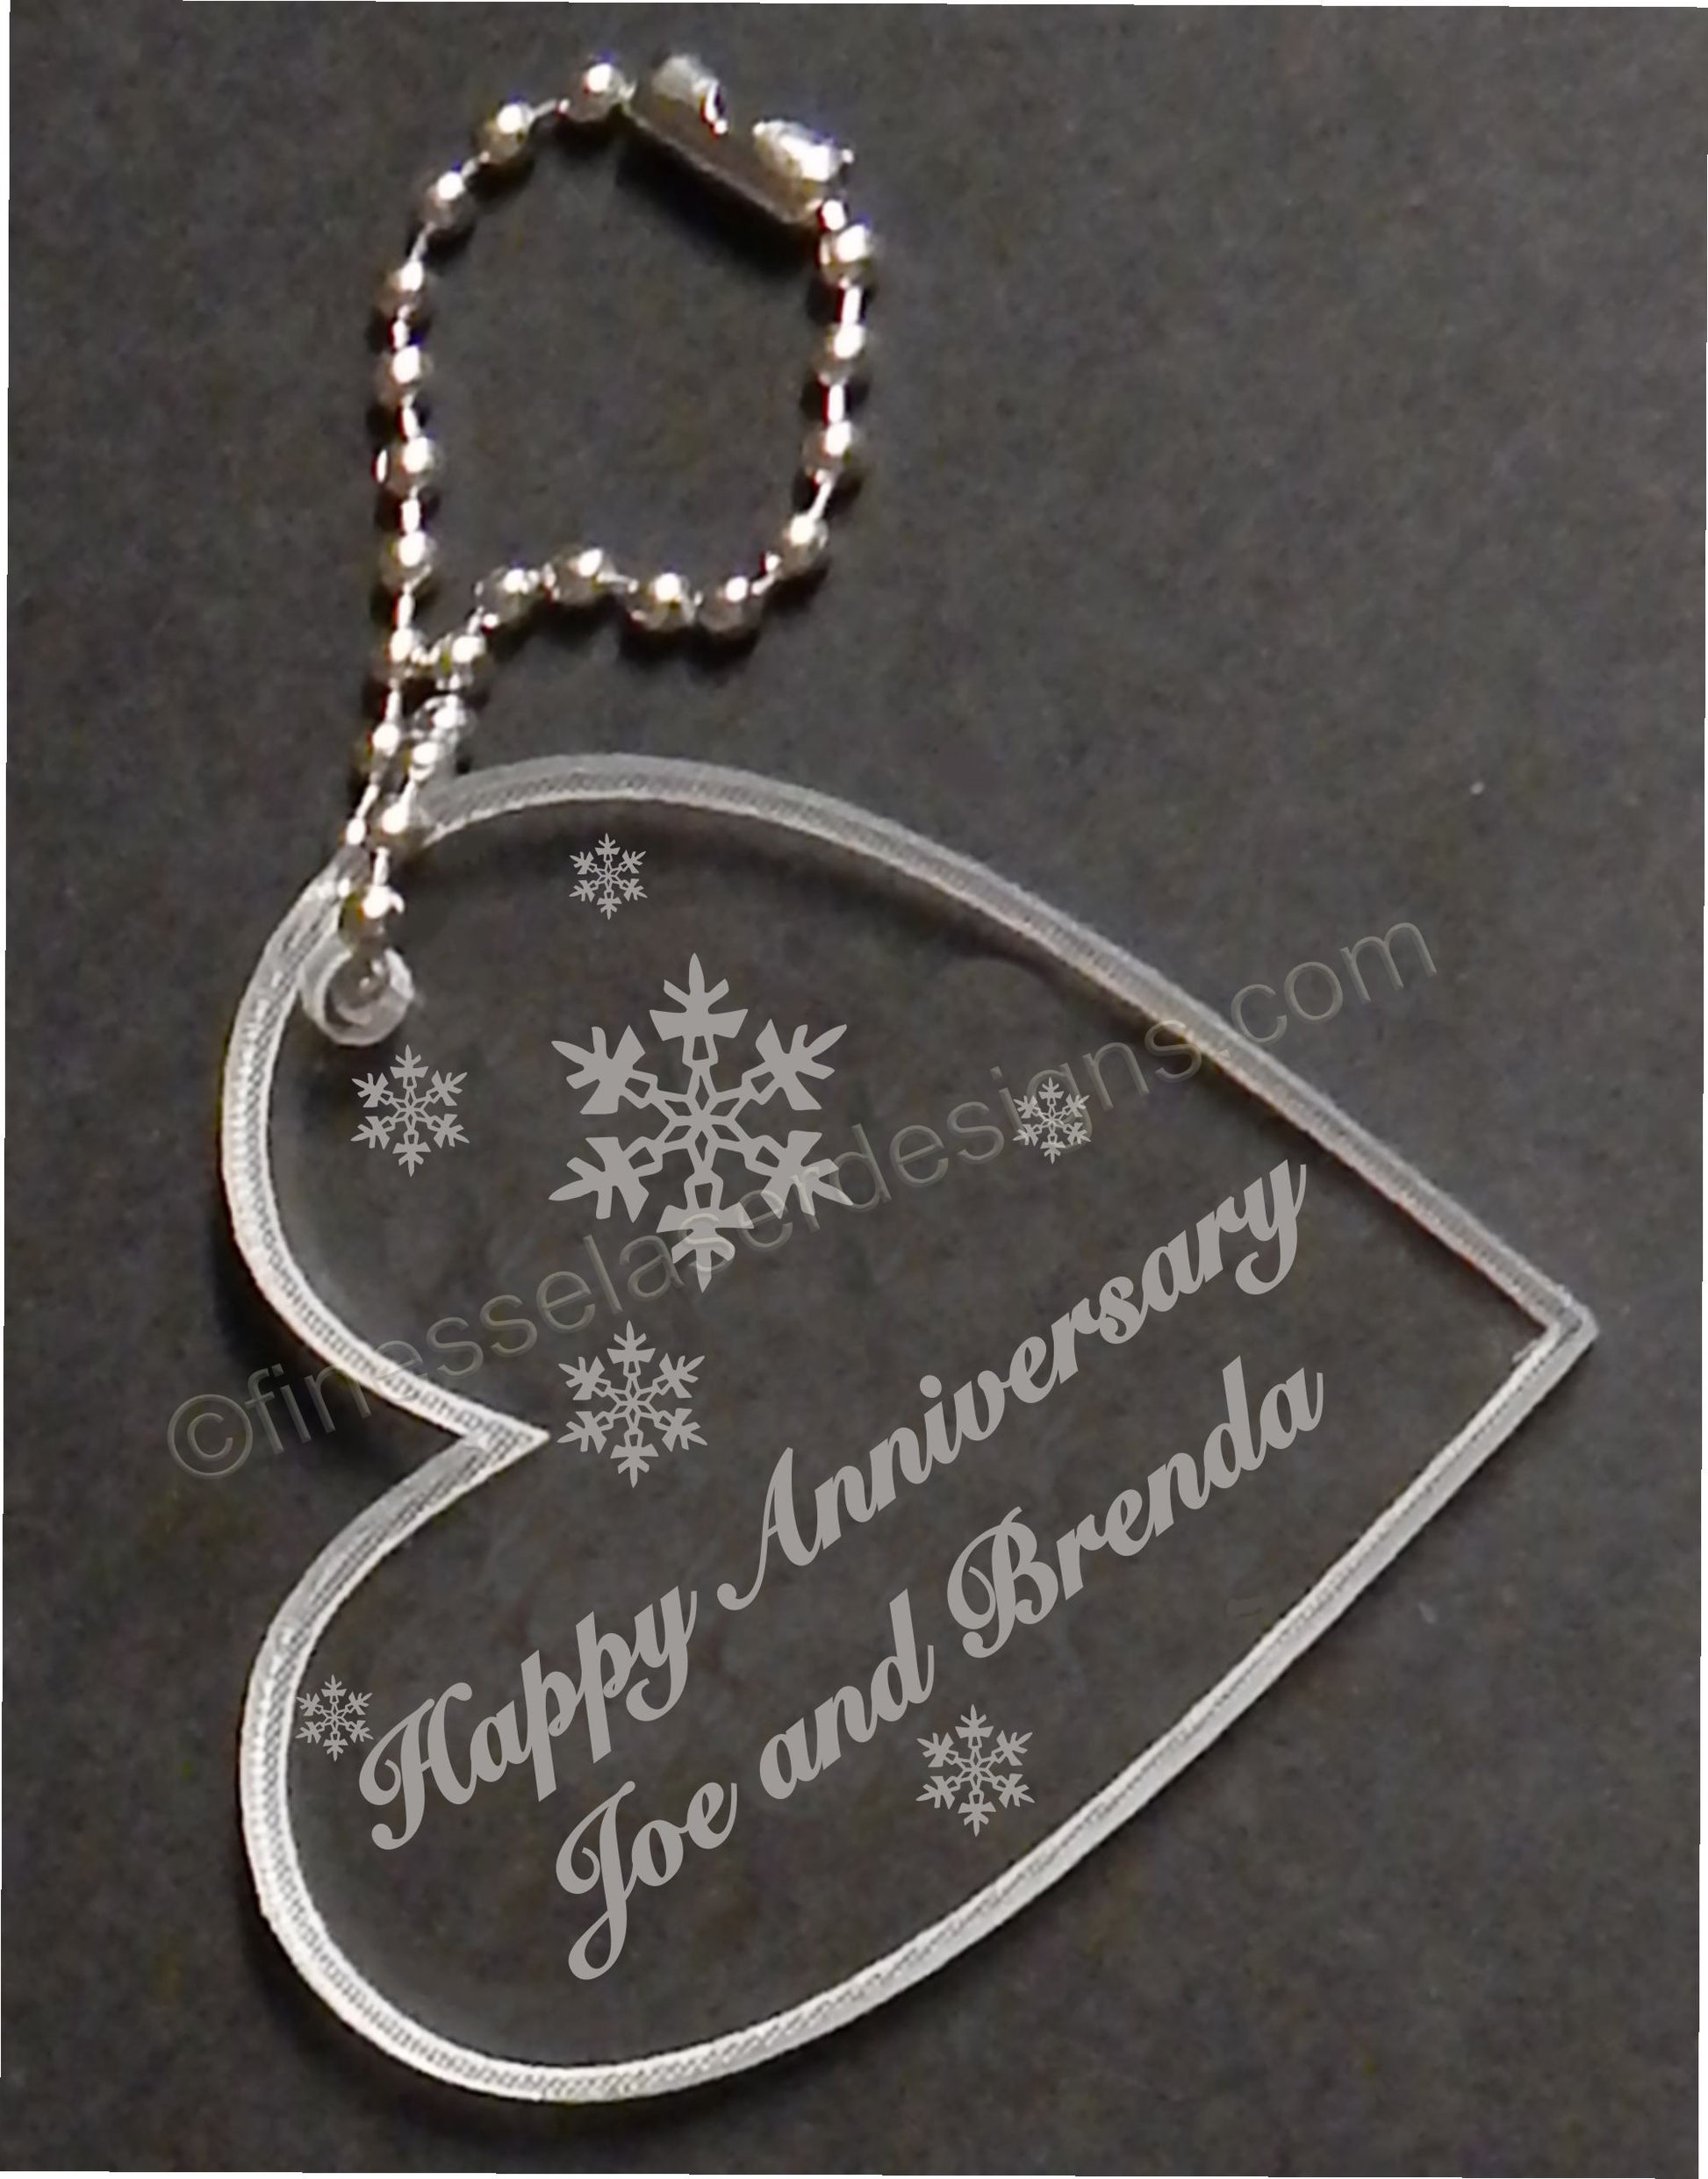 heart shaped keychain favor designed with wedding snowflakes and engraved with Happy Anniversary and names, with small metal chain attached